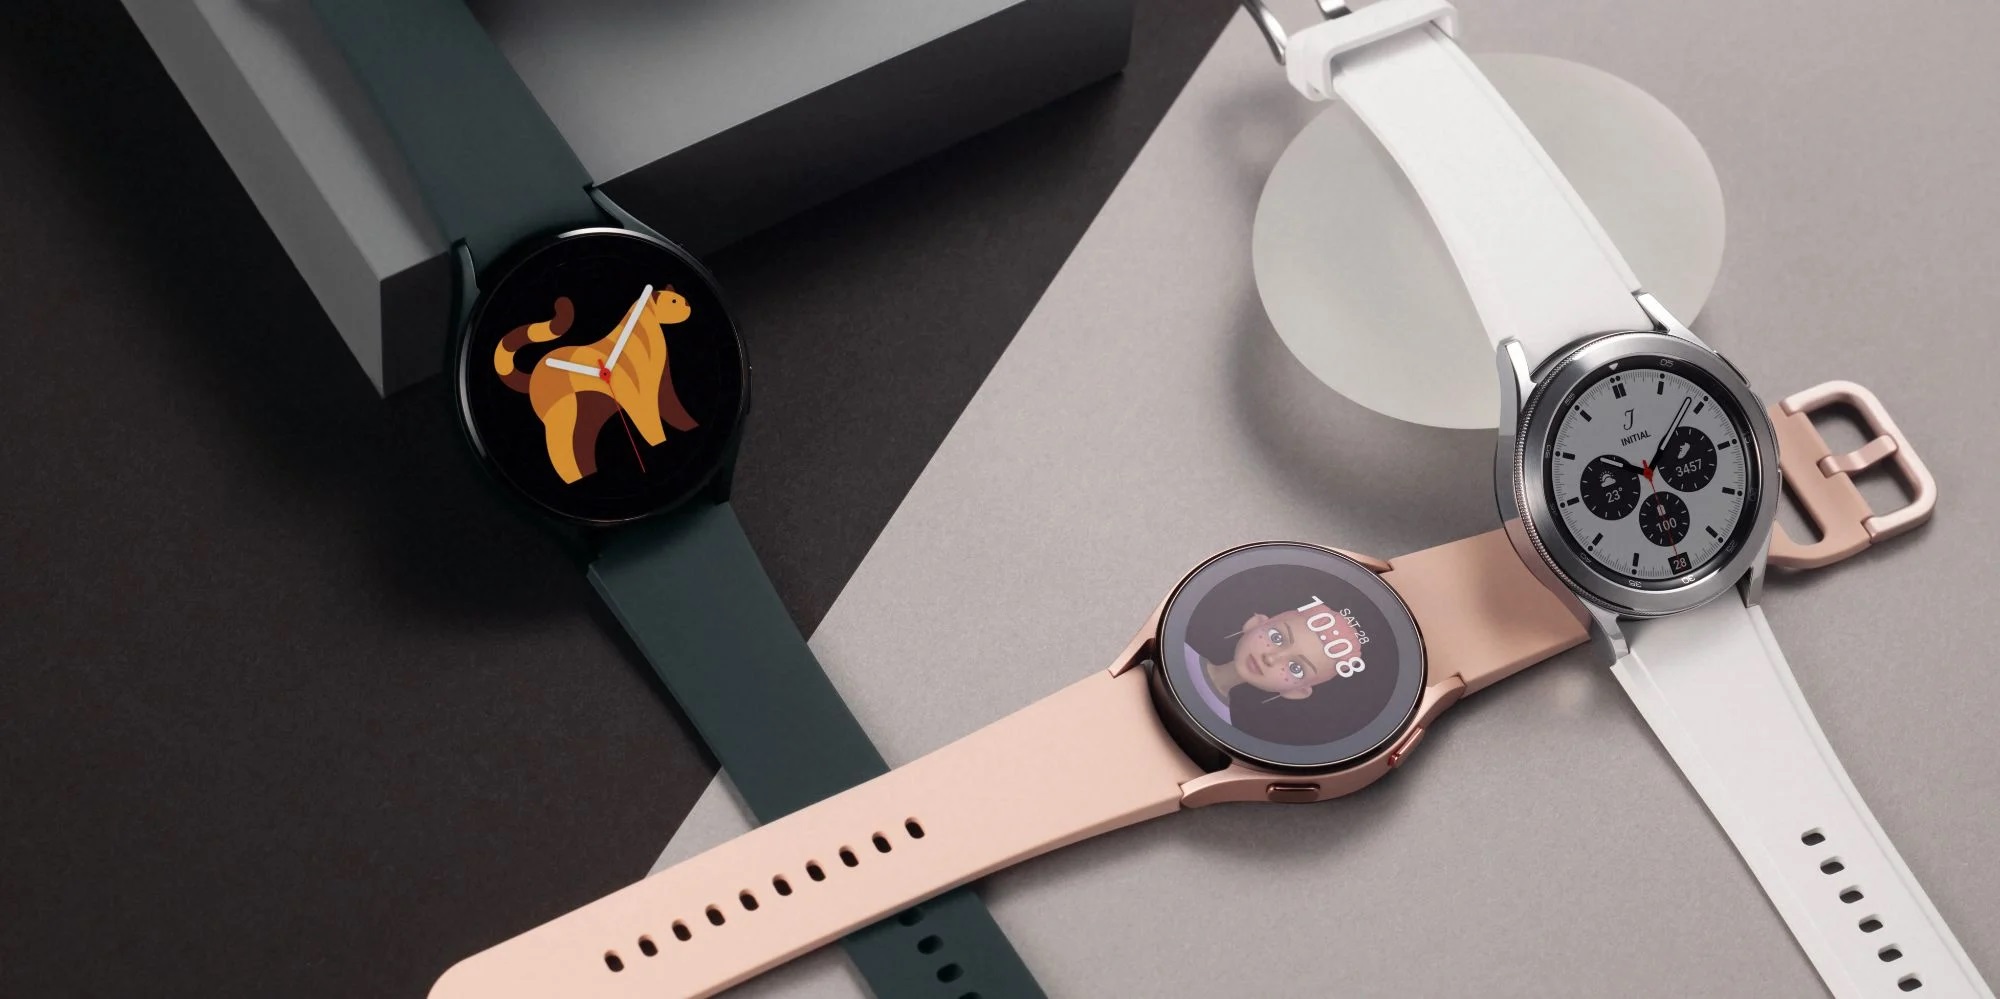 Not just iOS: Samsung Galaxy Watch 4 also does not support HarmonyOS